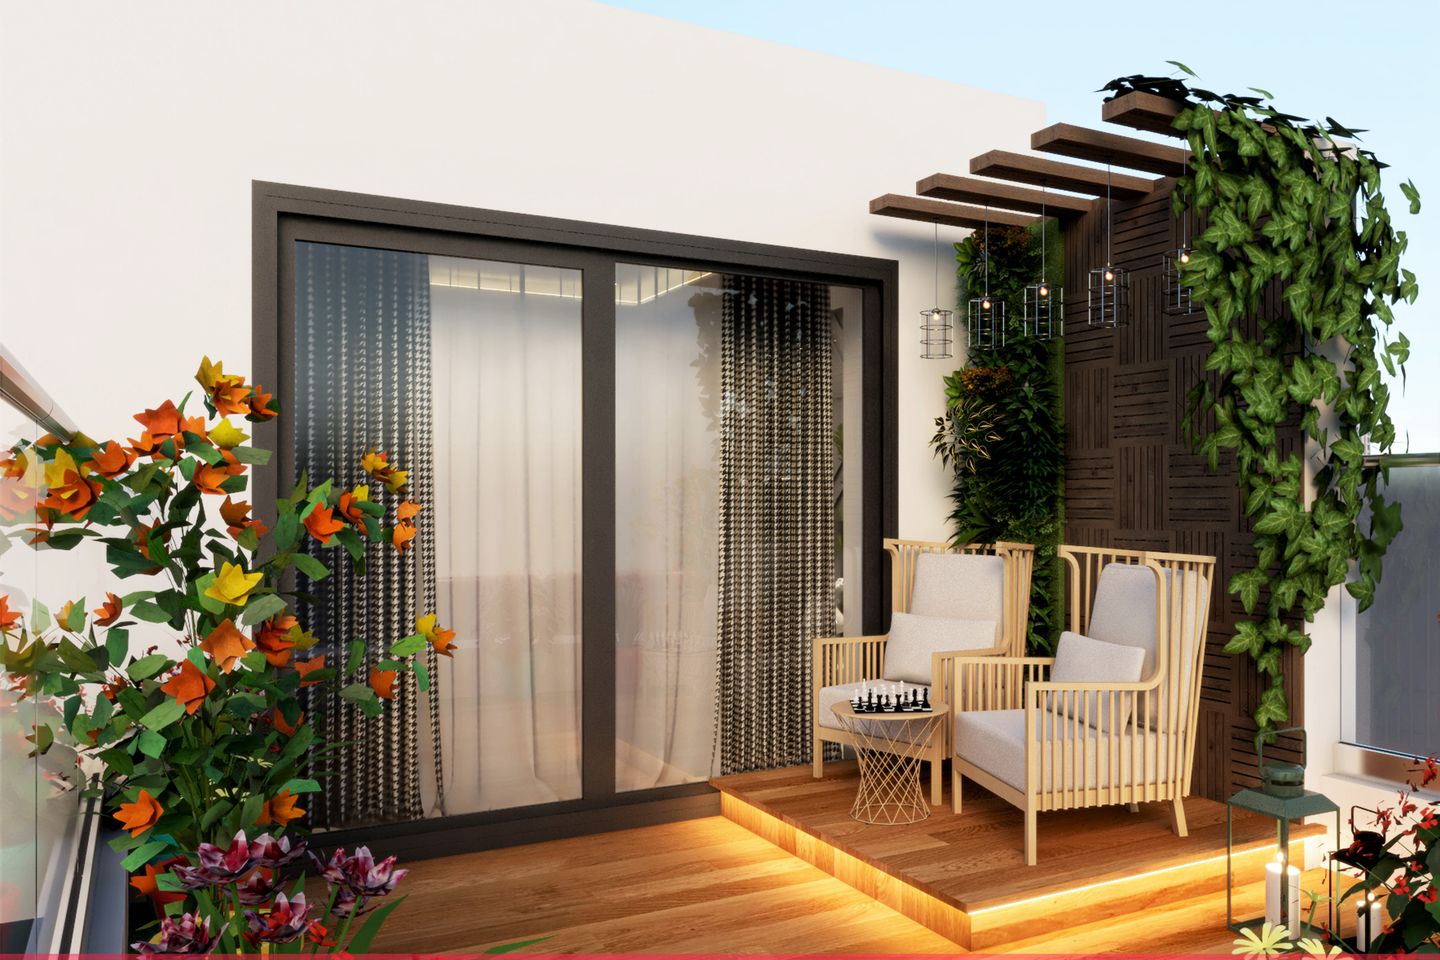 Open Roof Modern Balcony Design Idea with Platform and Plants - Livspace